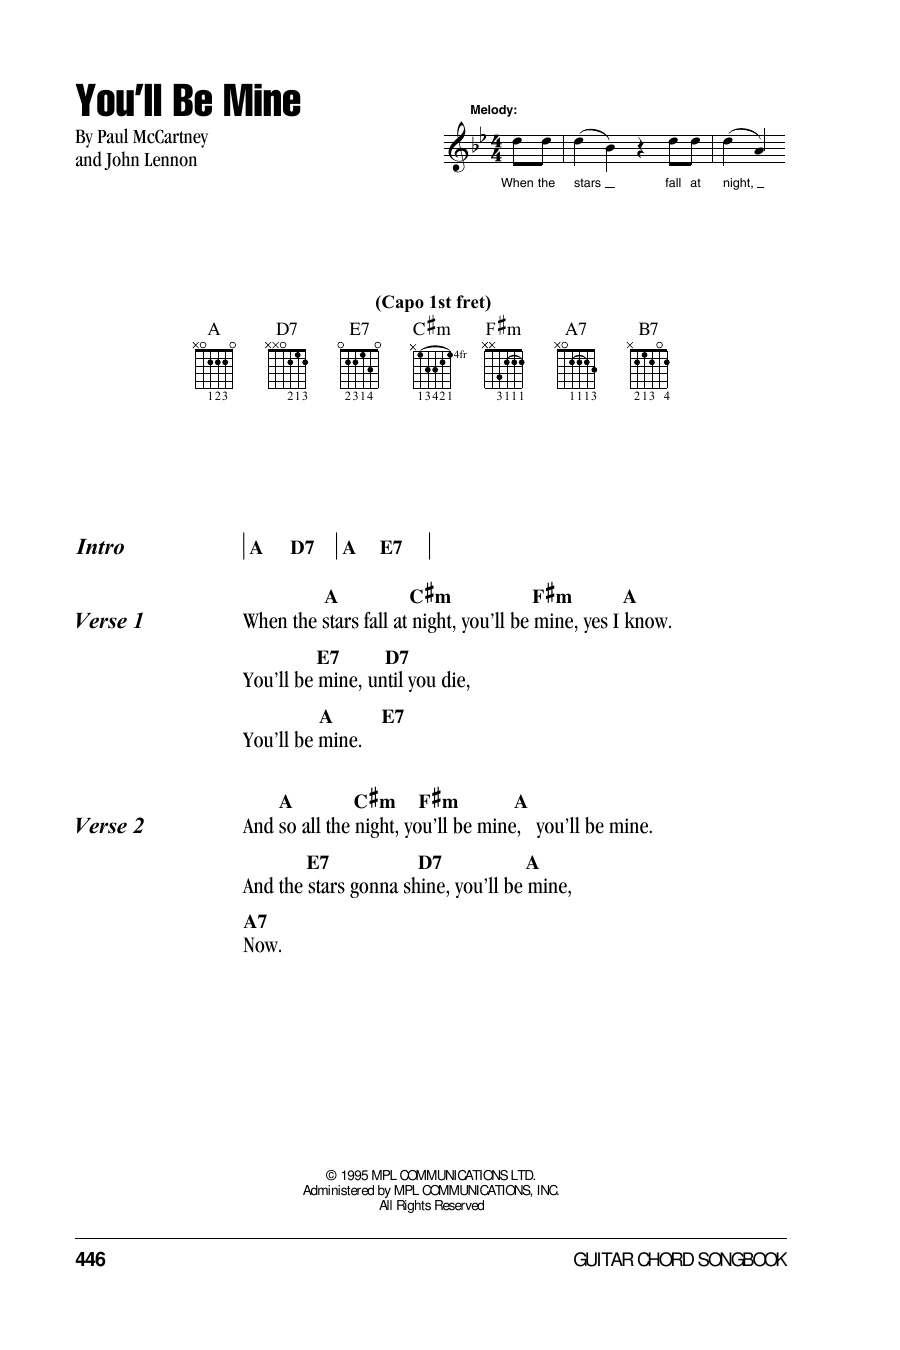 Download The Beatles You'll Be Mine Sheet Music